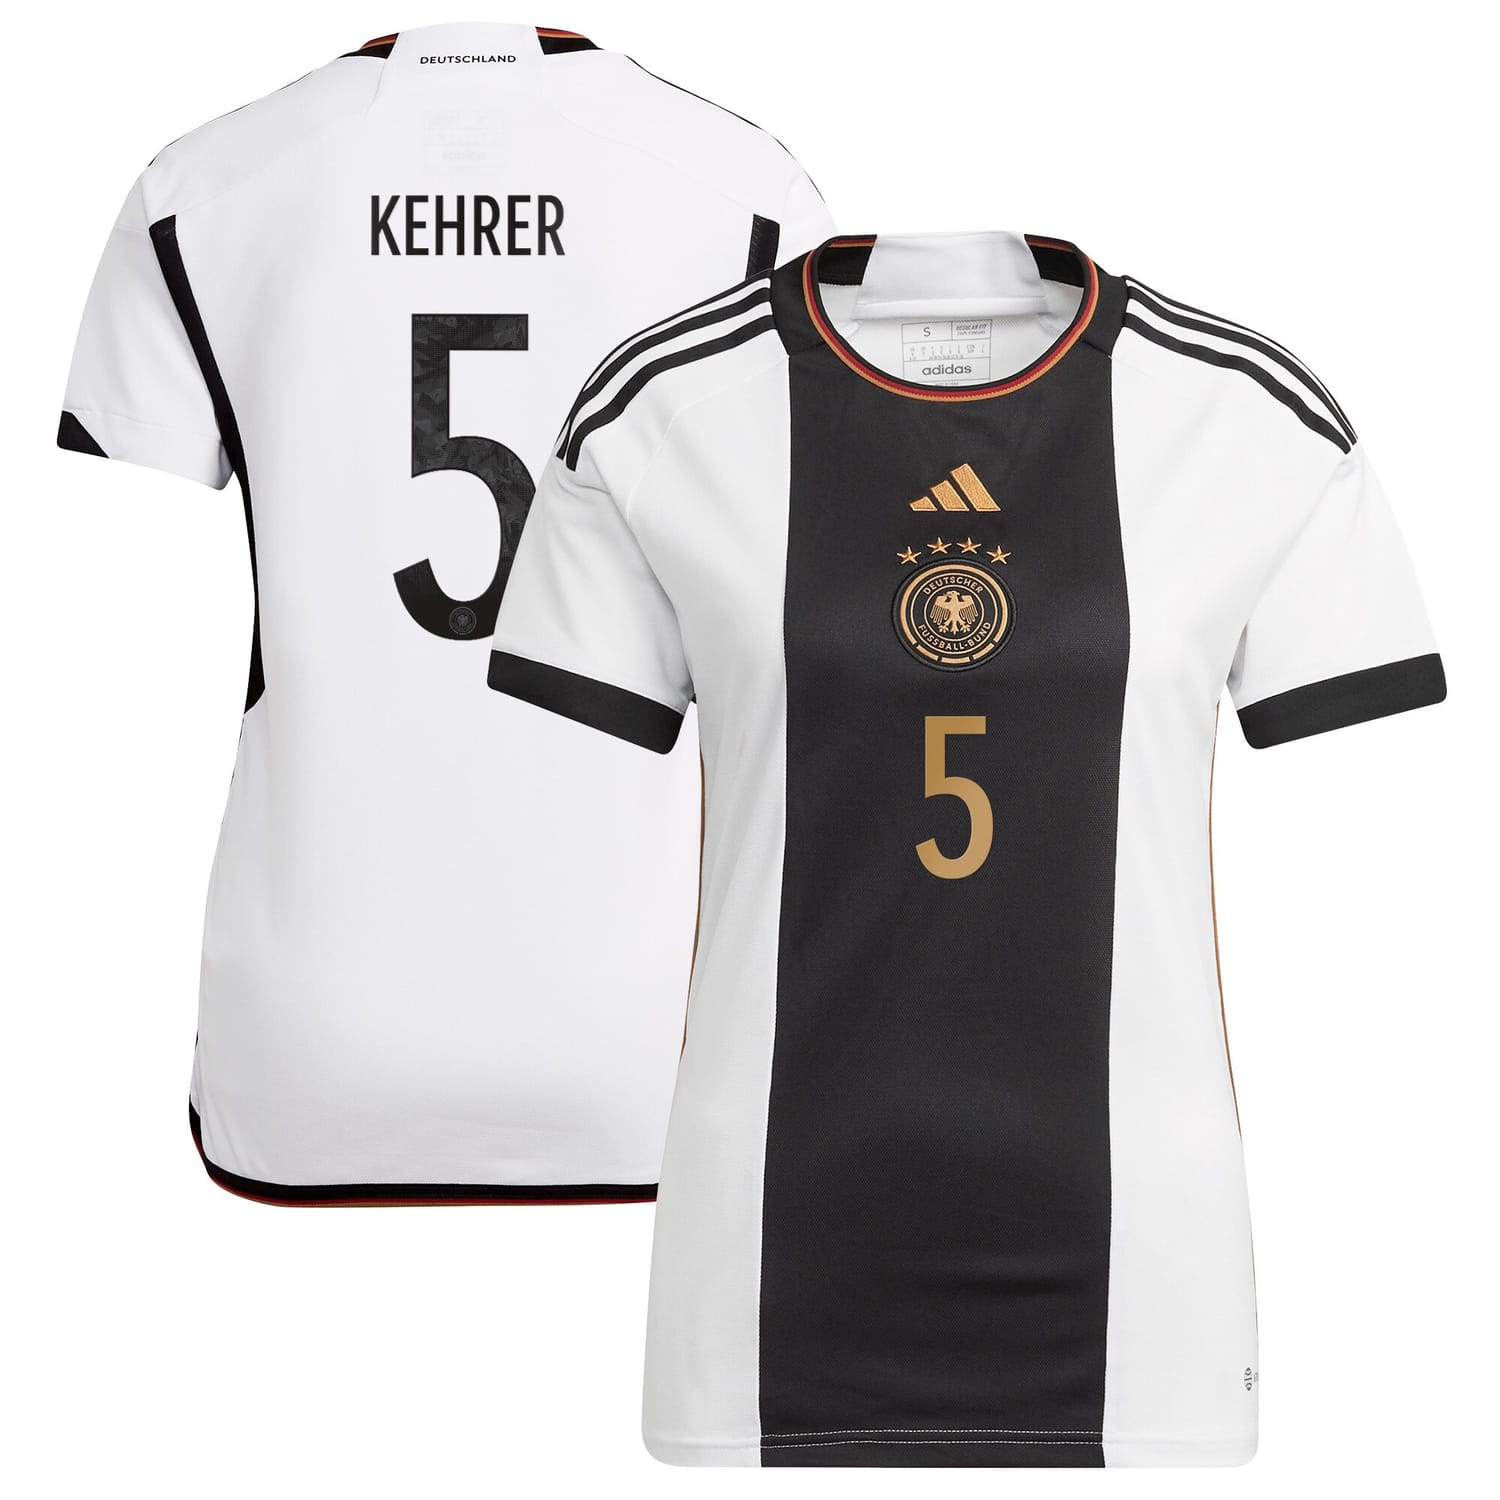 Germany National Team Home Jersey Shirt player Kehrer 5 printing for Women